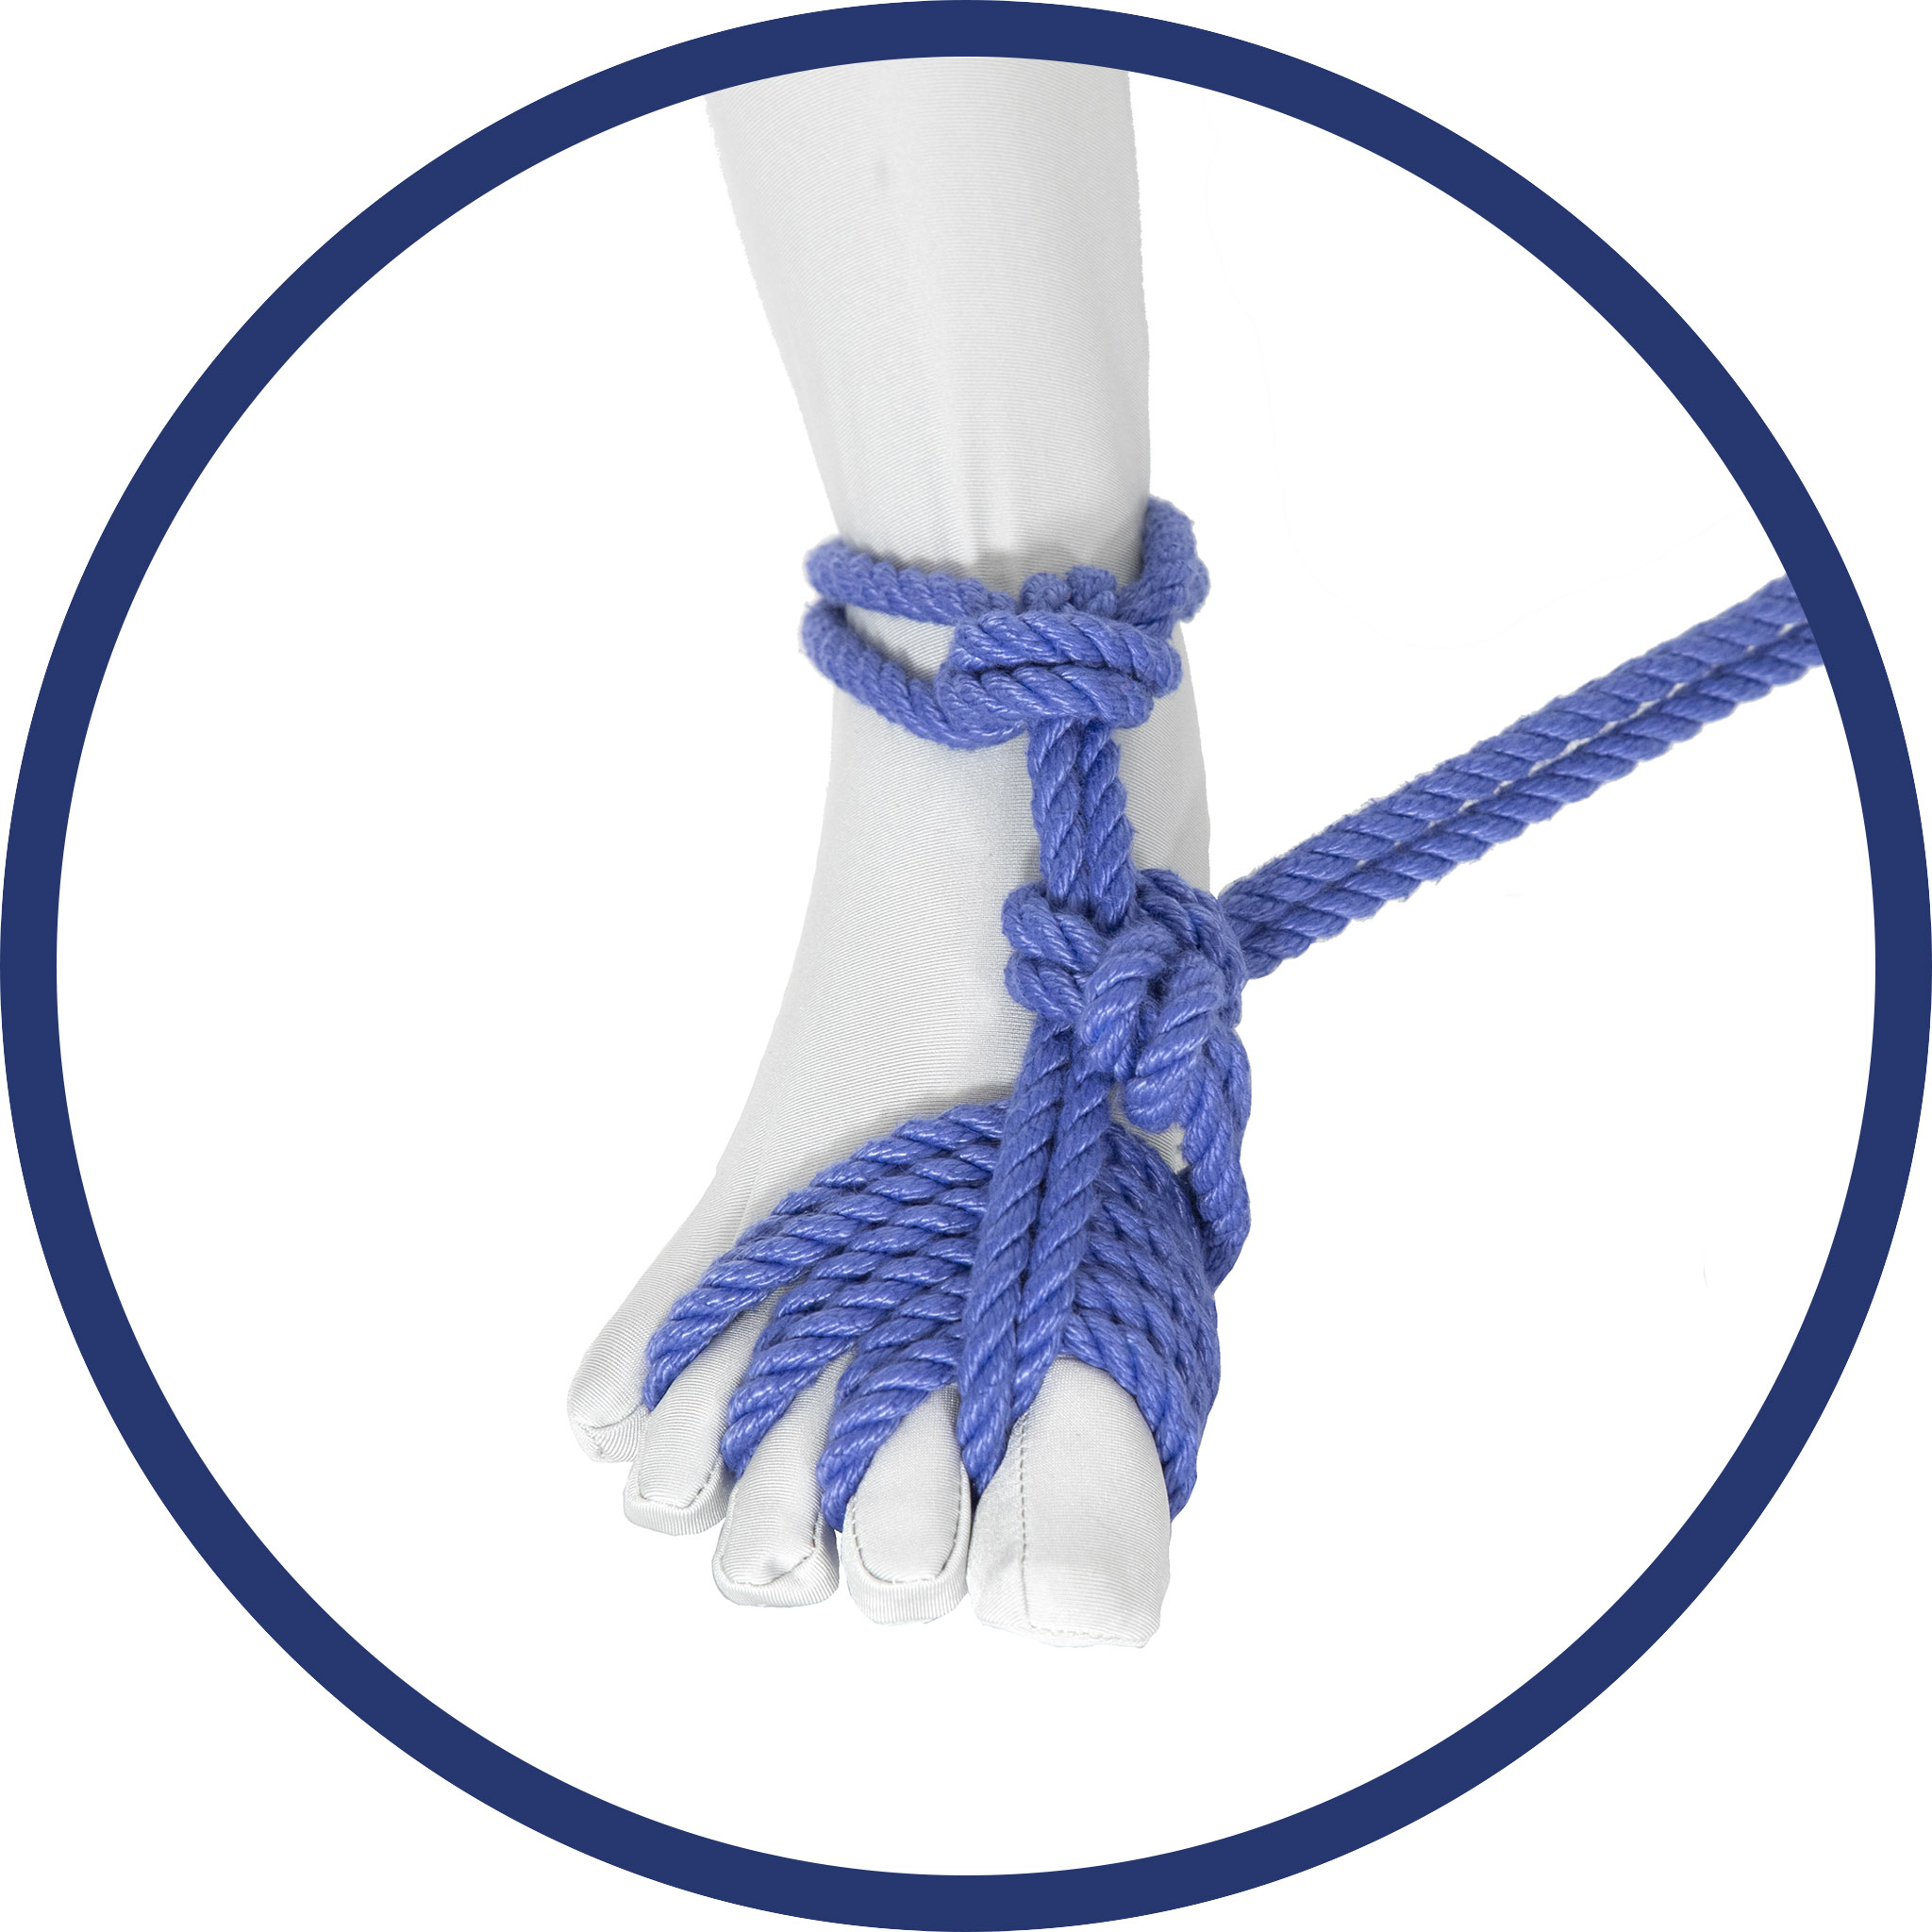 A foot in a white bodysuit with blue rope tied around the ankle and threaded between the toes, framed by a blue circle.